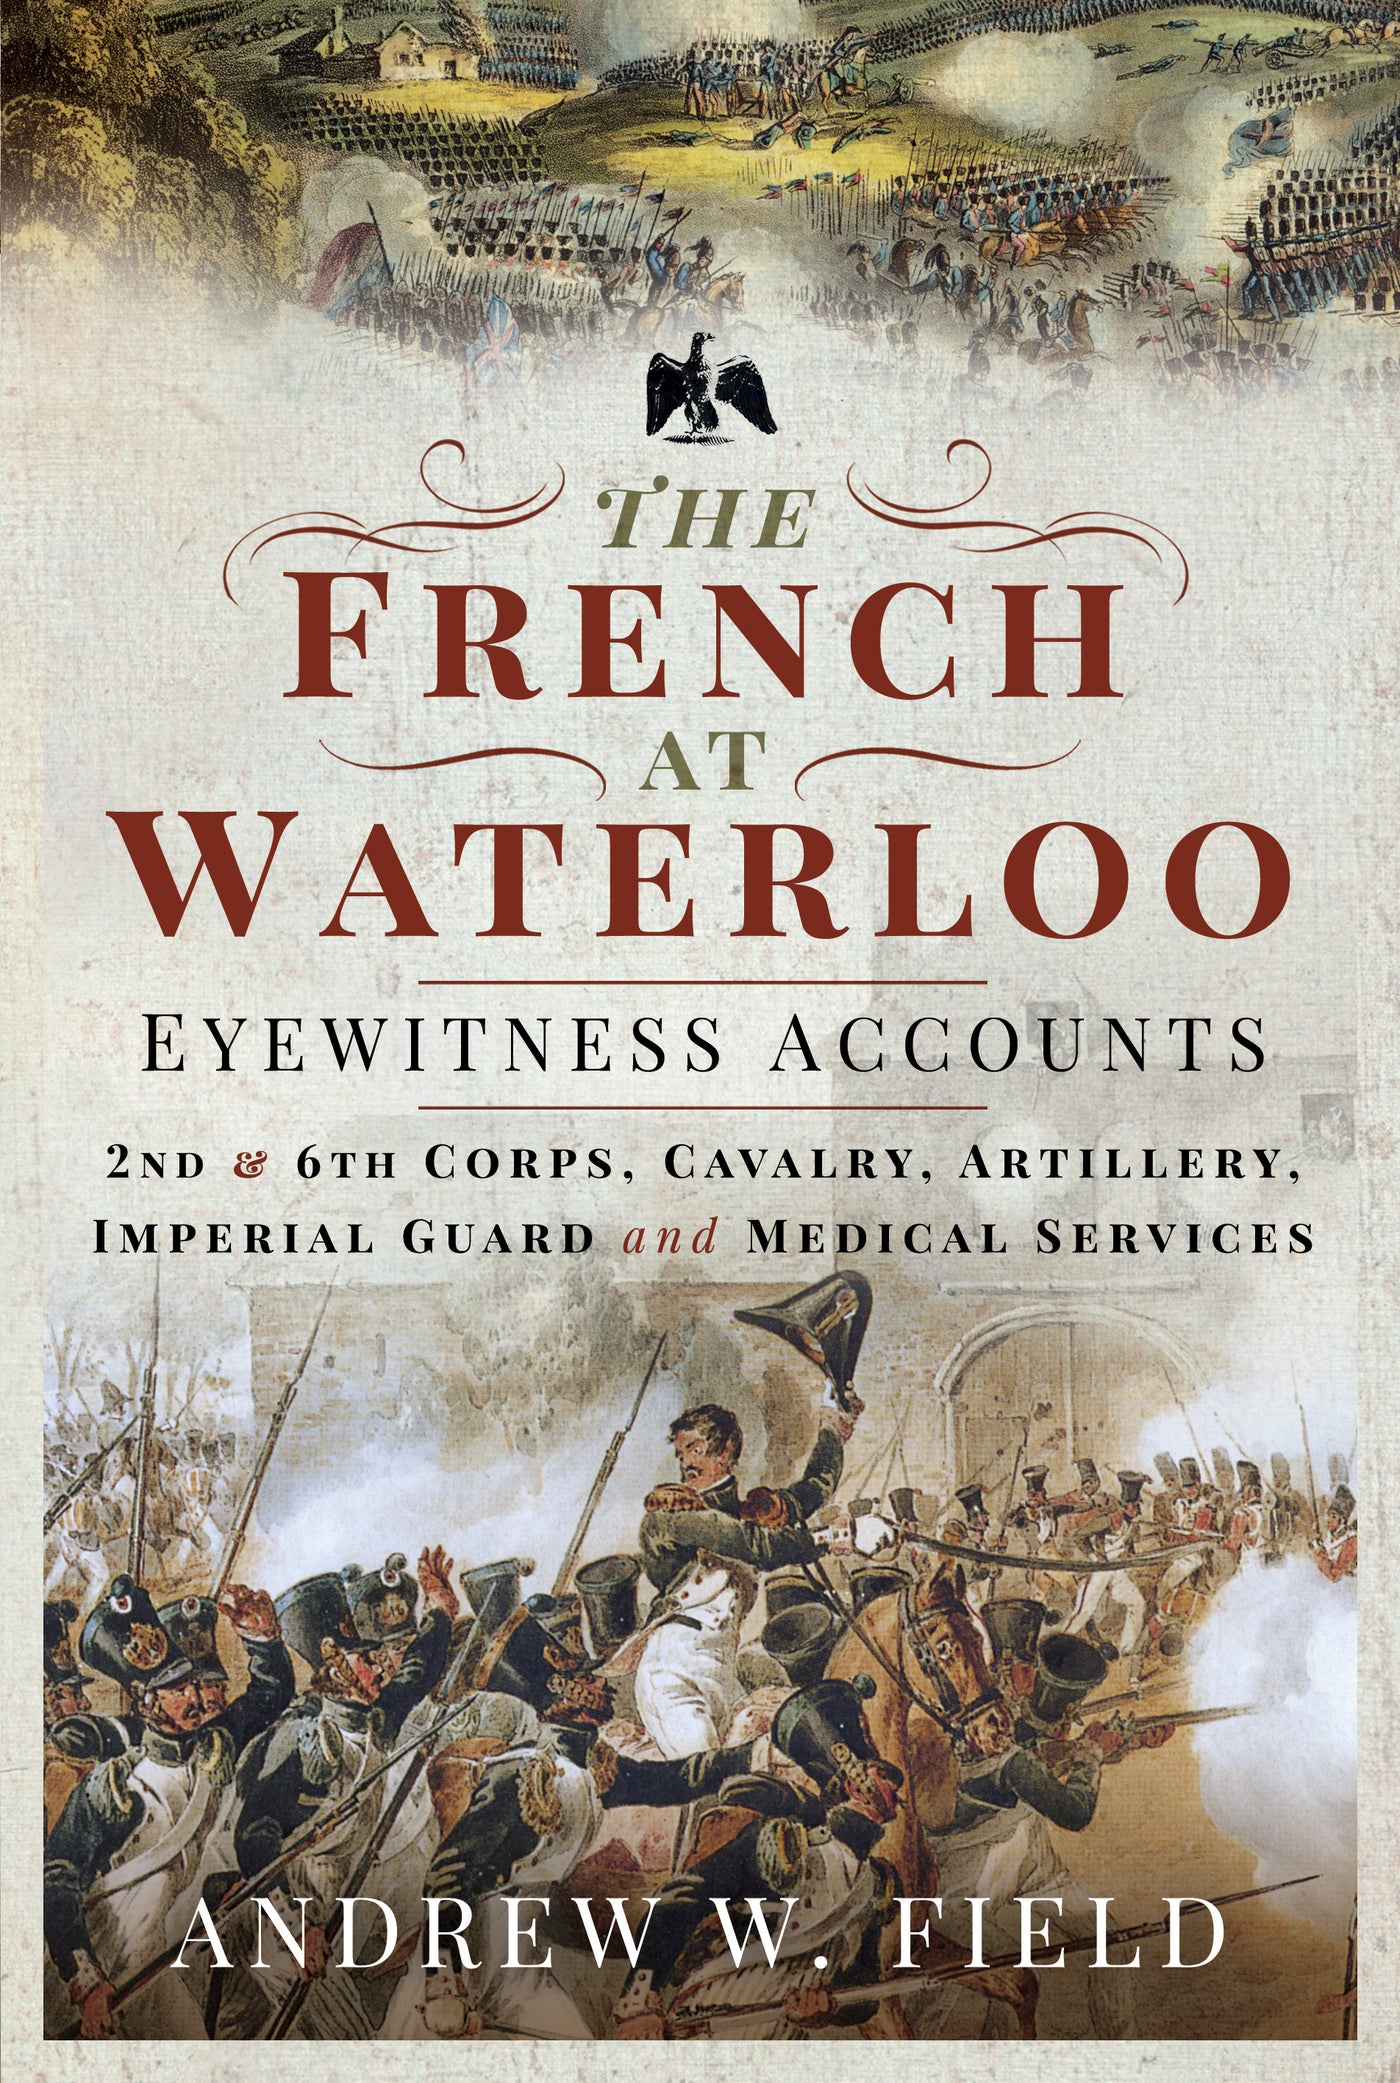 The French at Waterloo - Eyewitness Accounts